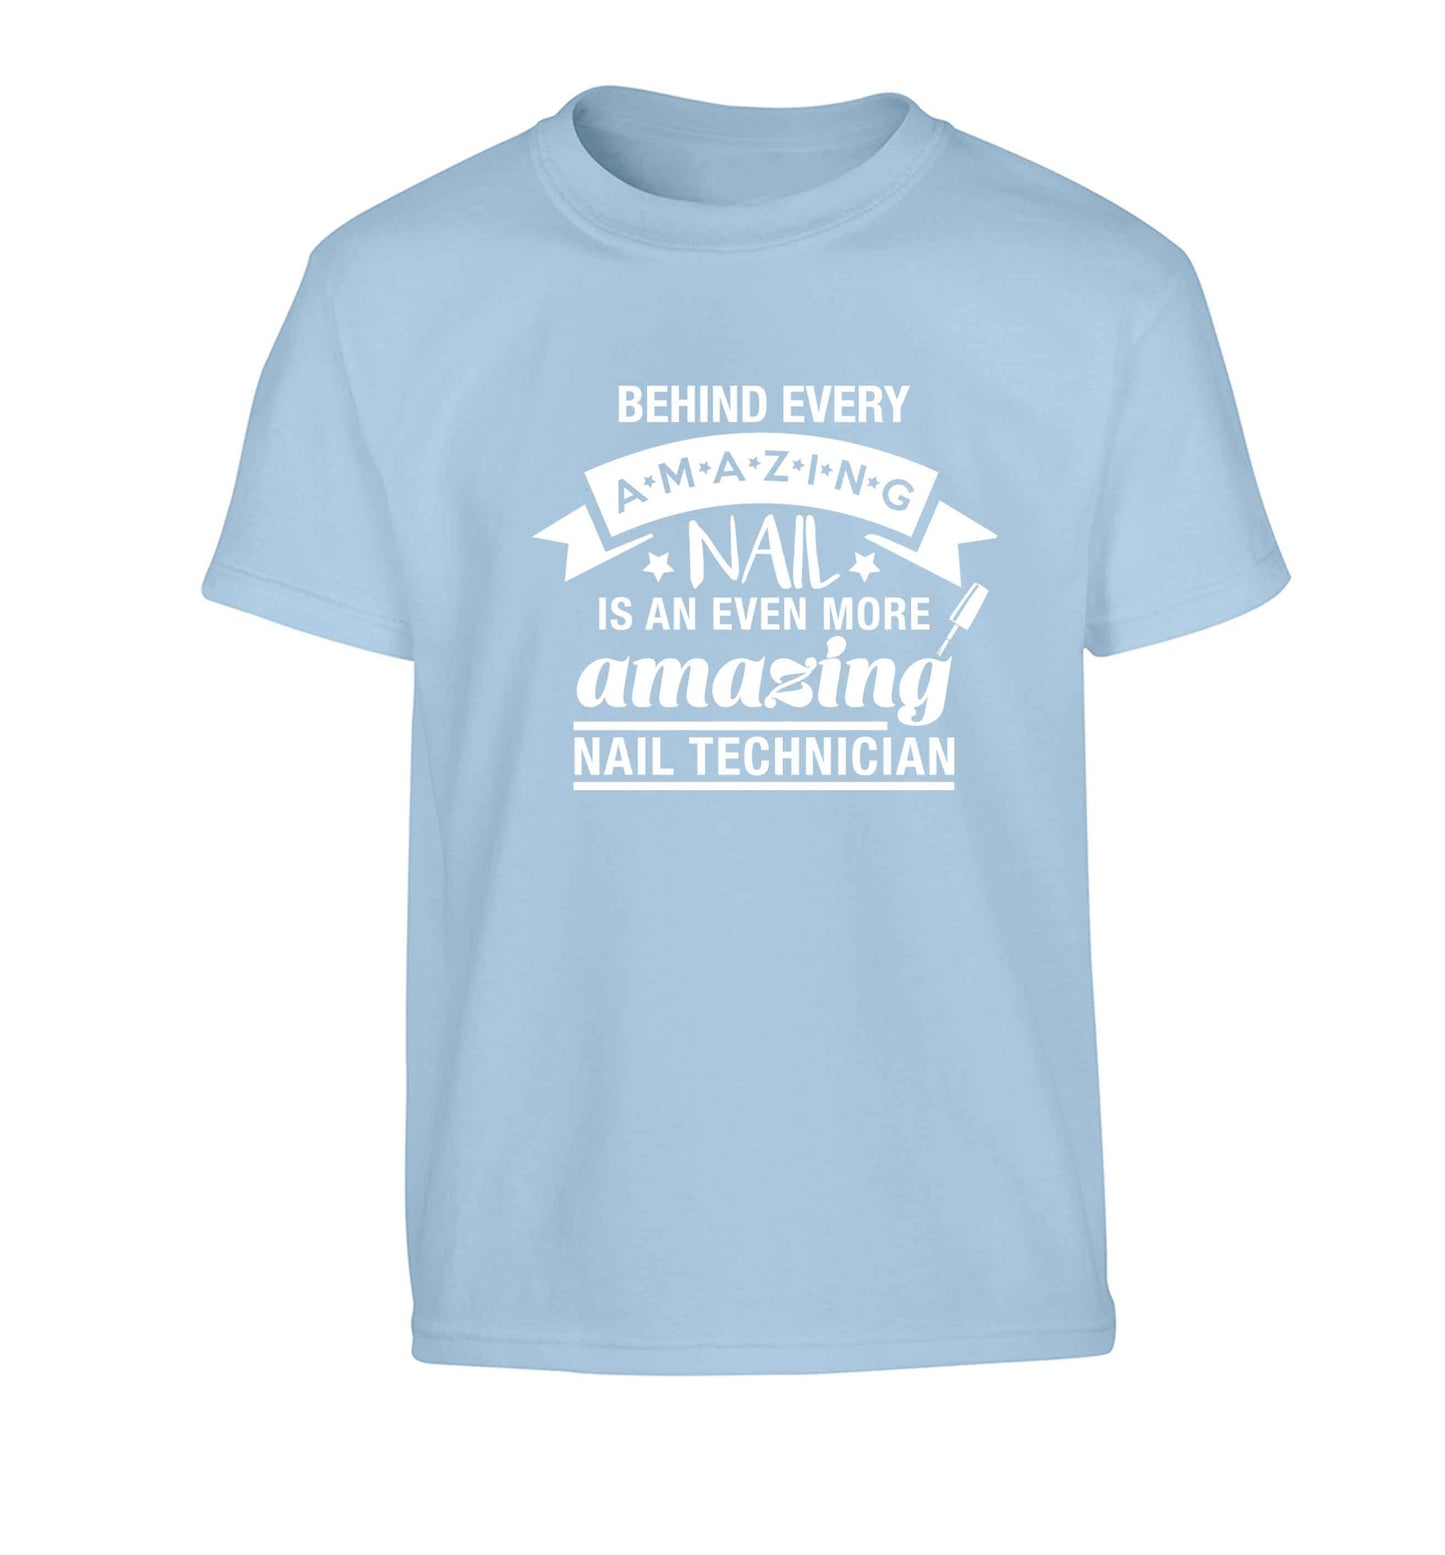 Behind every amazing nail is an even more amazing nail technician Children's light blue Tshirt 12-13 Years